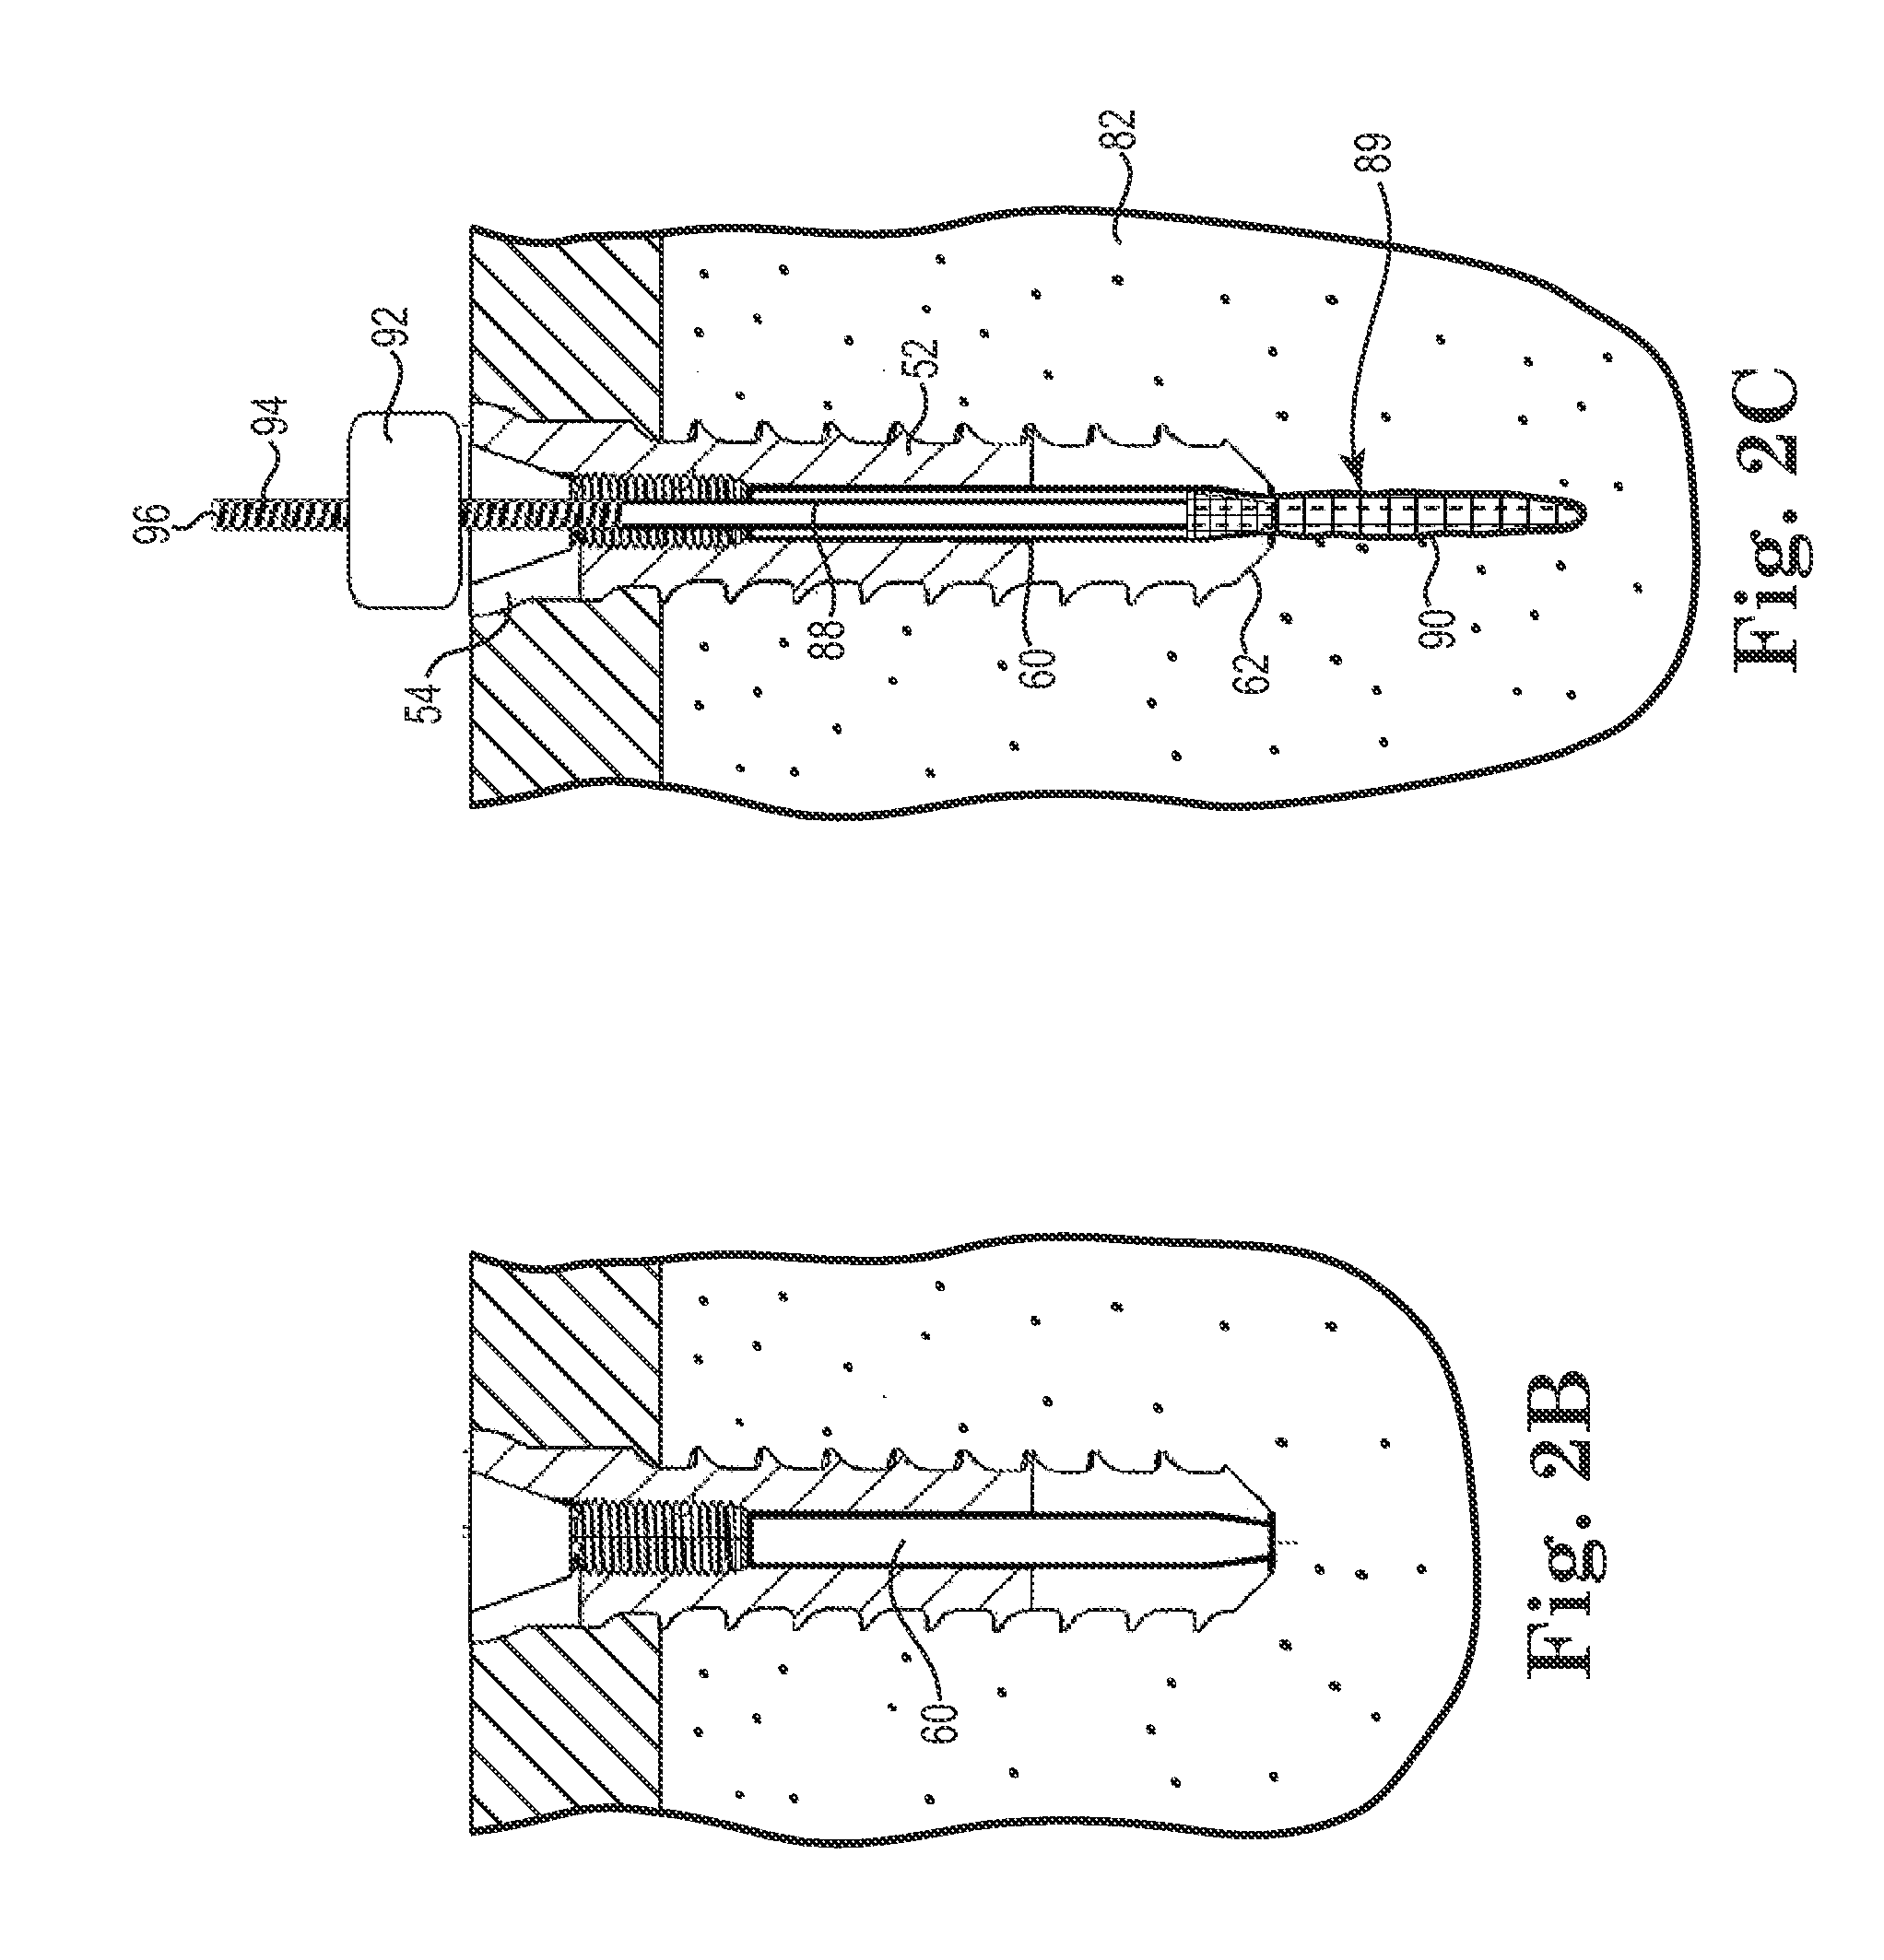 Fixation System for Orthopedic Devices